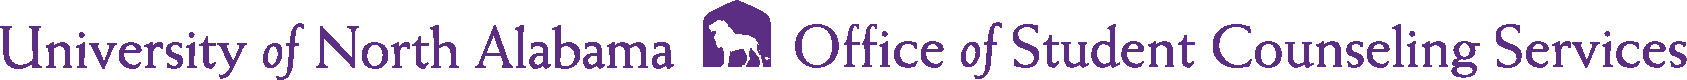 office of student counseling services logo 2